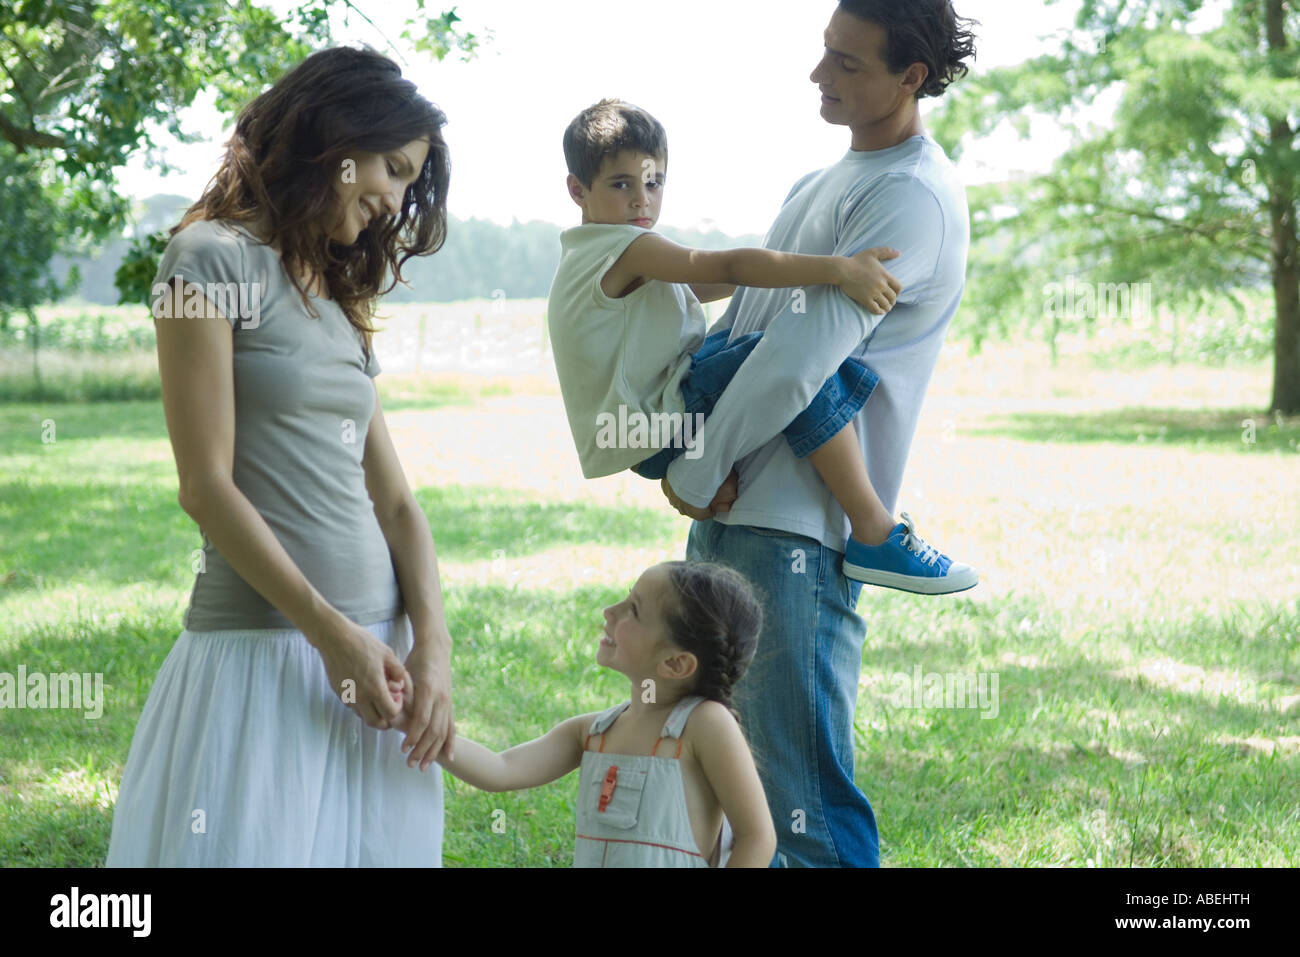 Family outdoors on a grassy lawn on a sunny day Stock Photo